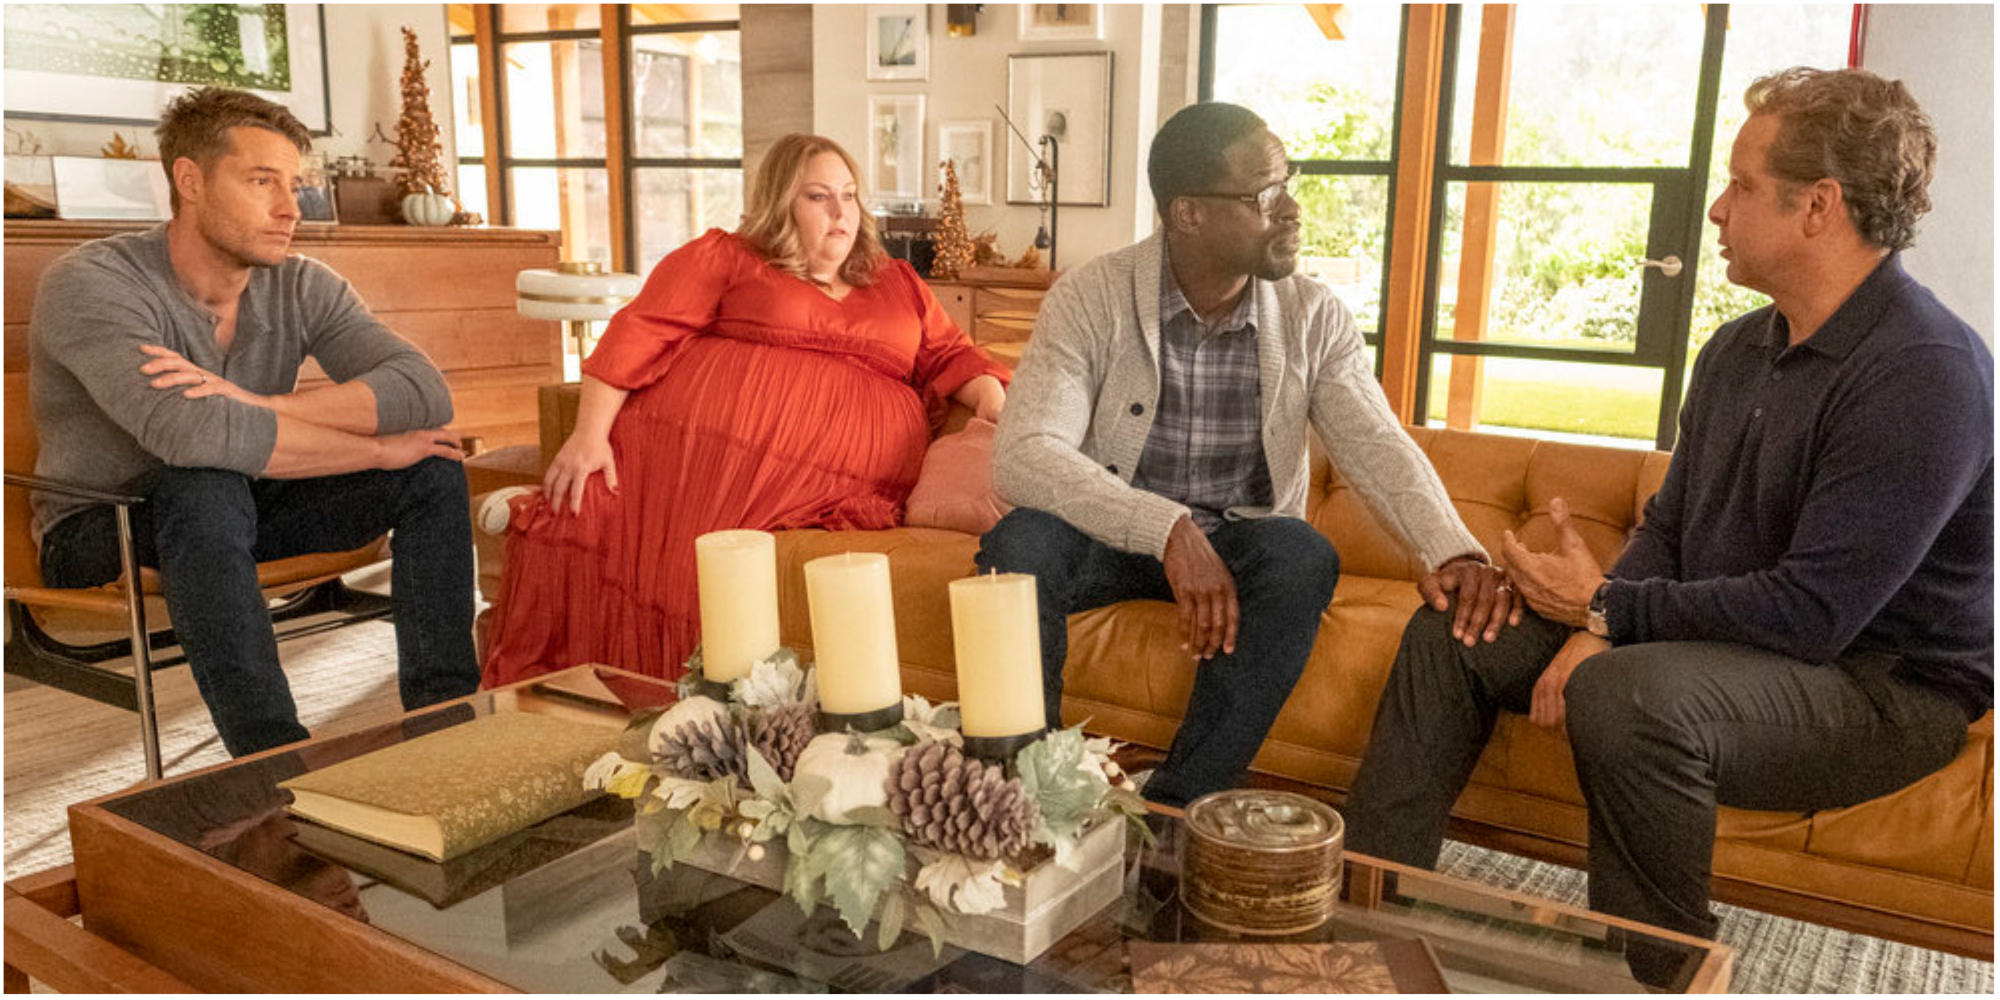 Justin Hartley, Chrissy Metz, Sterling K. Brown, and Chris Geere star on This Is Us.